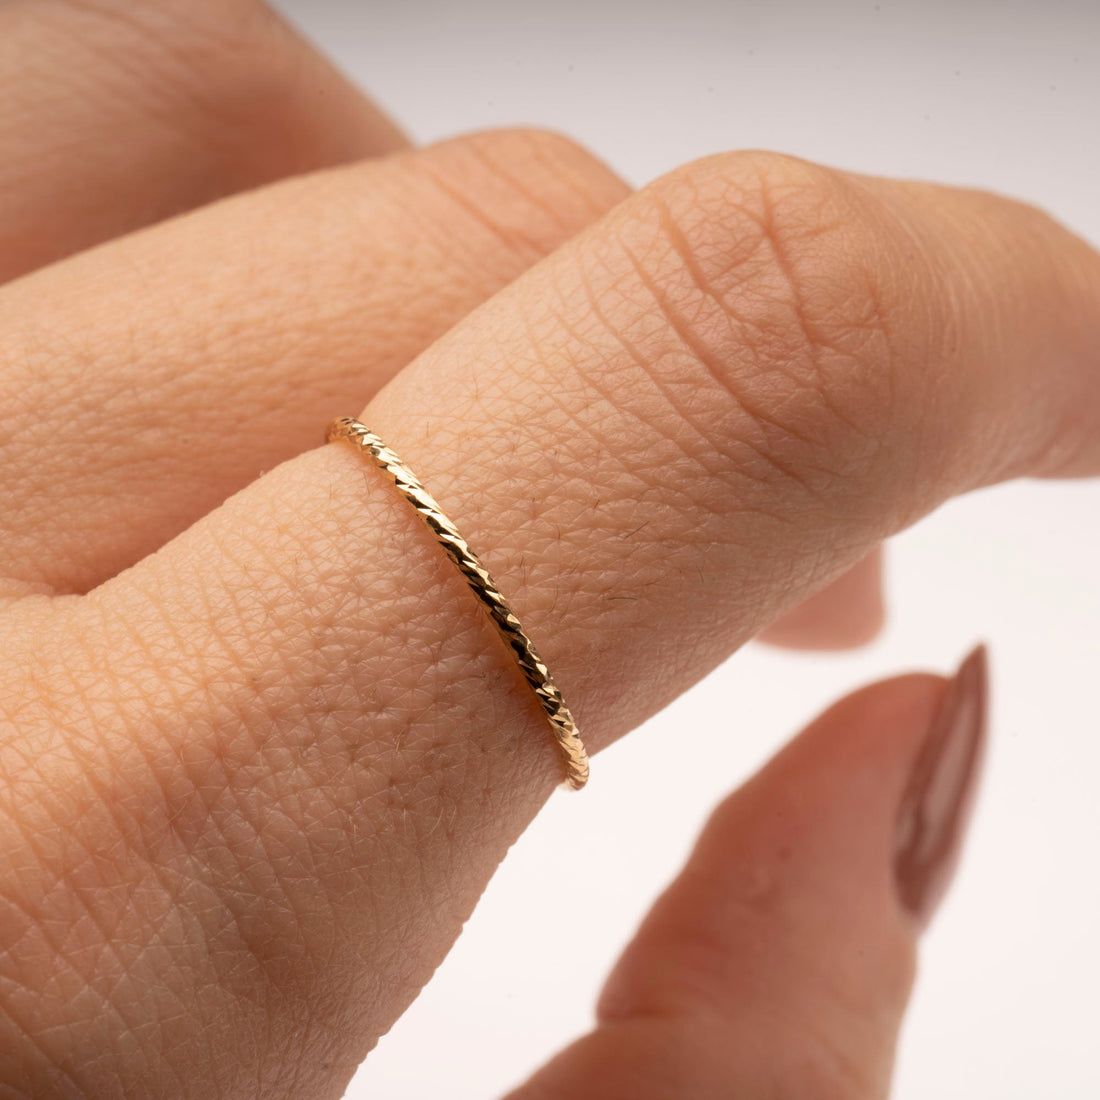 Gold Sparkle Band Ring, 14k Gold Filled Ring, Gold Stacker, Gold Band Ring, Delicate Ring, Simple Gold Ring, Womens Gold Ring, Holiday Gift